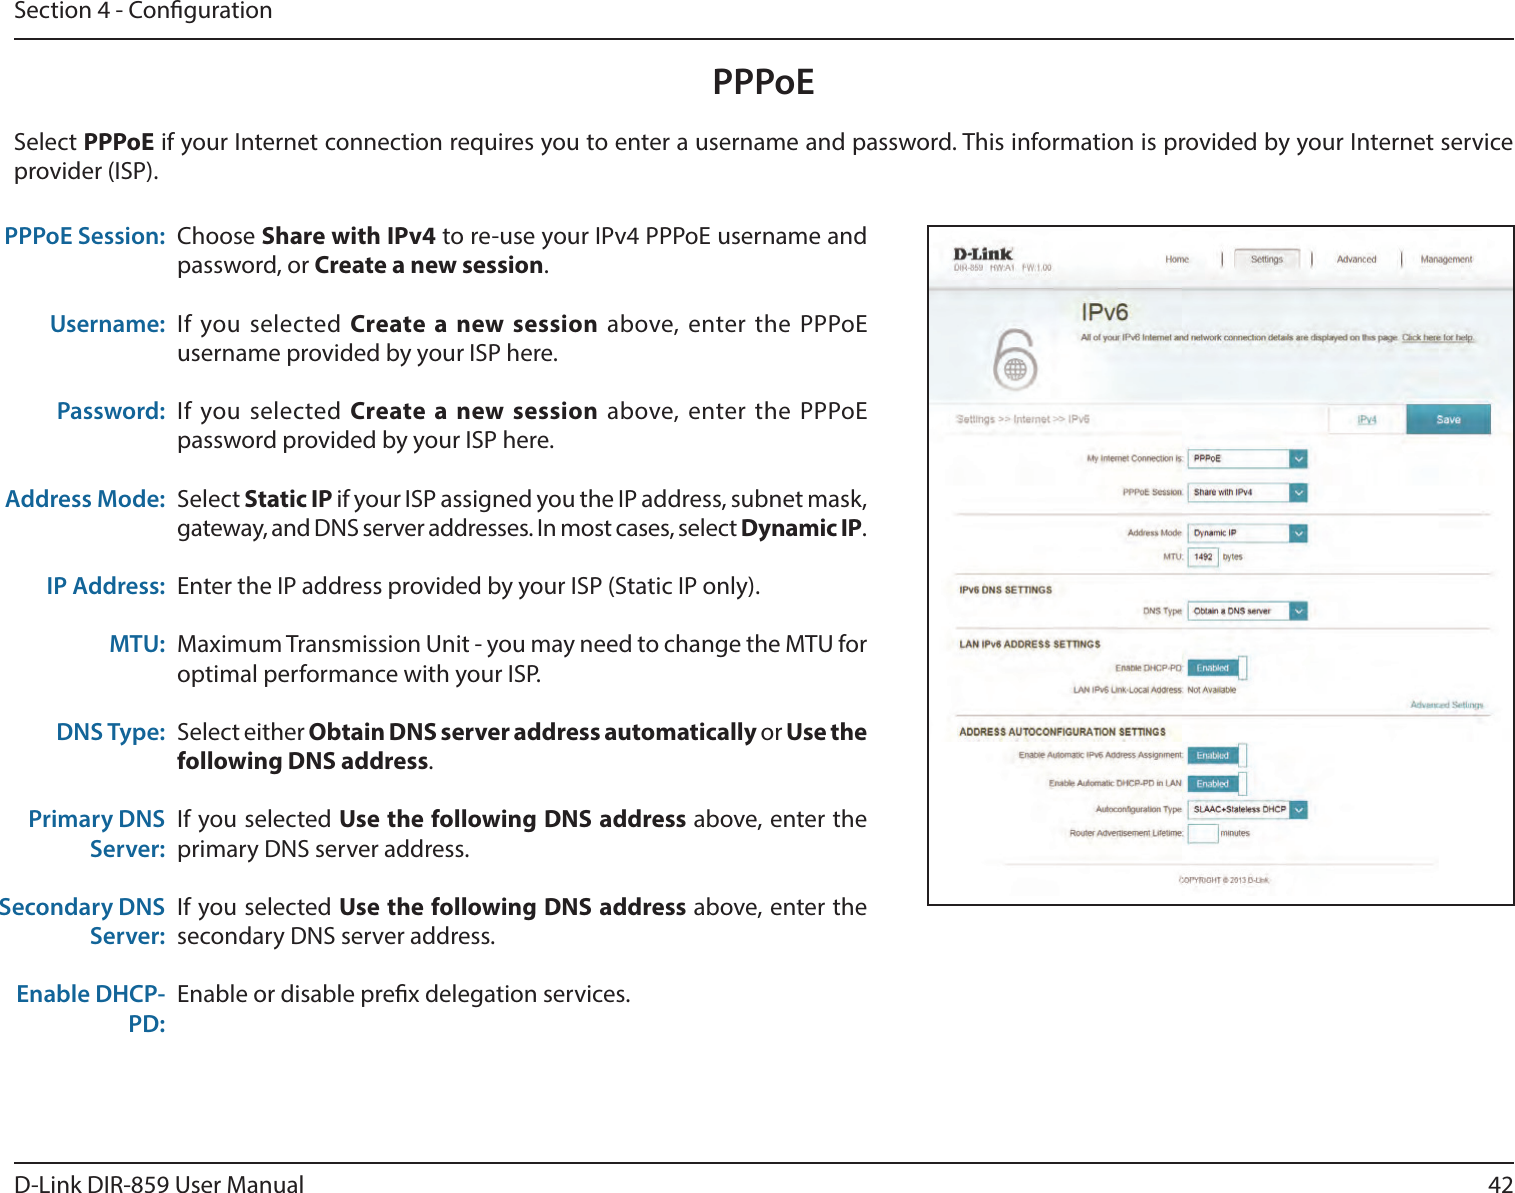 42D-Link DIR-859 User ManualSection 4 - CongurationPPPoEChoose Share with IPv4 to re-use your IPv4 PPPoE username and password, or Create a new session.If you selected Create a new session above, enter the PPPoE username provided by your ISP here.If you selected Create a new session above, enter the PPPoE password provided by your ISP here.Select Static IP if your ISP assigned you the IP address, subnet mask, gateway, and DNS server addresses. In most cases, select Dynamic IP.Enter the IP address provided by your ISP (Static IP only).Maximum Transmission Unit - you may need to change the MTU for optimal performance with your ISP.Select either Obtain DNS server address automatically or Use the following DNS address.If you selected Use the following DNS address above, enter the primary DNS server address. If you selected Use the following DNS address above, enter the secondary DNS server address.Enable or disable prex delegation services.PPPoE Session:Username:Password:Address Mode:IP Address:MTU:DNS Type:Primary DNS Server:Secondary DNS Server:Enable DHCP-PD:Select PPPoE if your Internet connection requires you to enter a username and password. This information is provided by your Internet service provider (ISP).